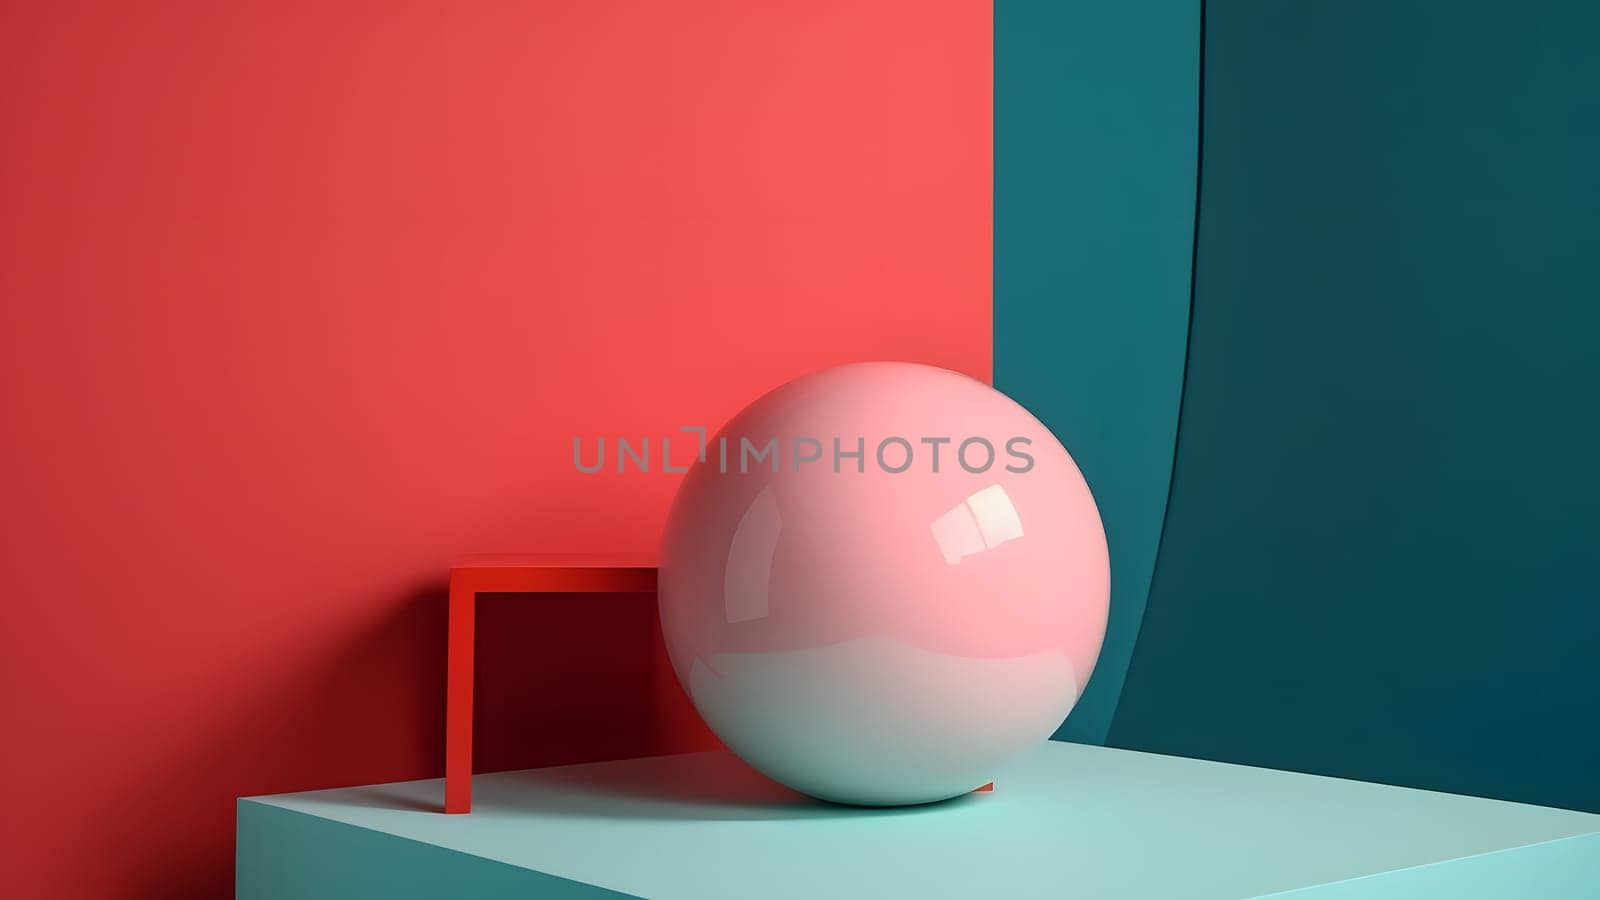 abstract minimalistic composition with gloss pink ball on red and green walls with turquoise floor. Neural network generated in May 2023. Not based on any actual person, scene or pattern.